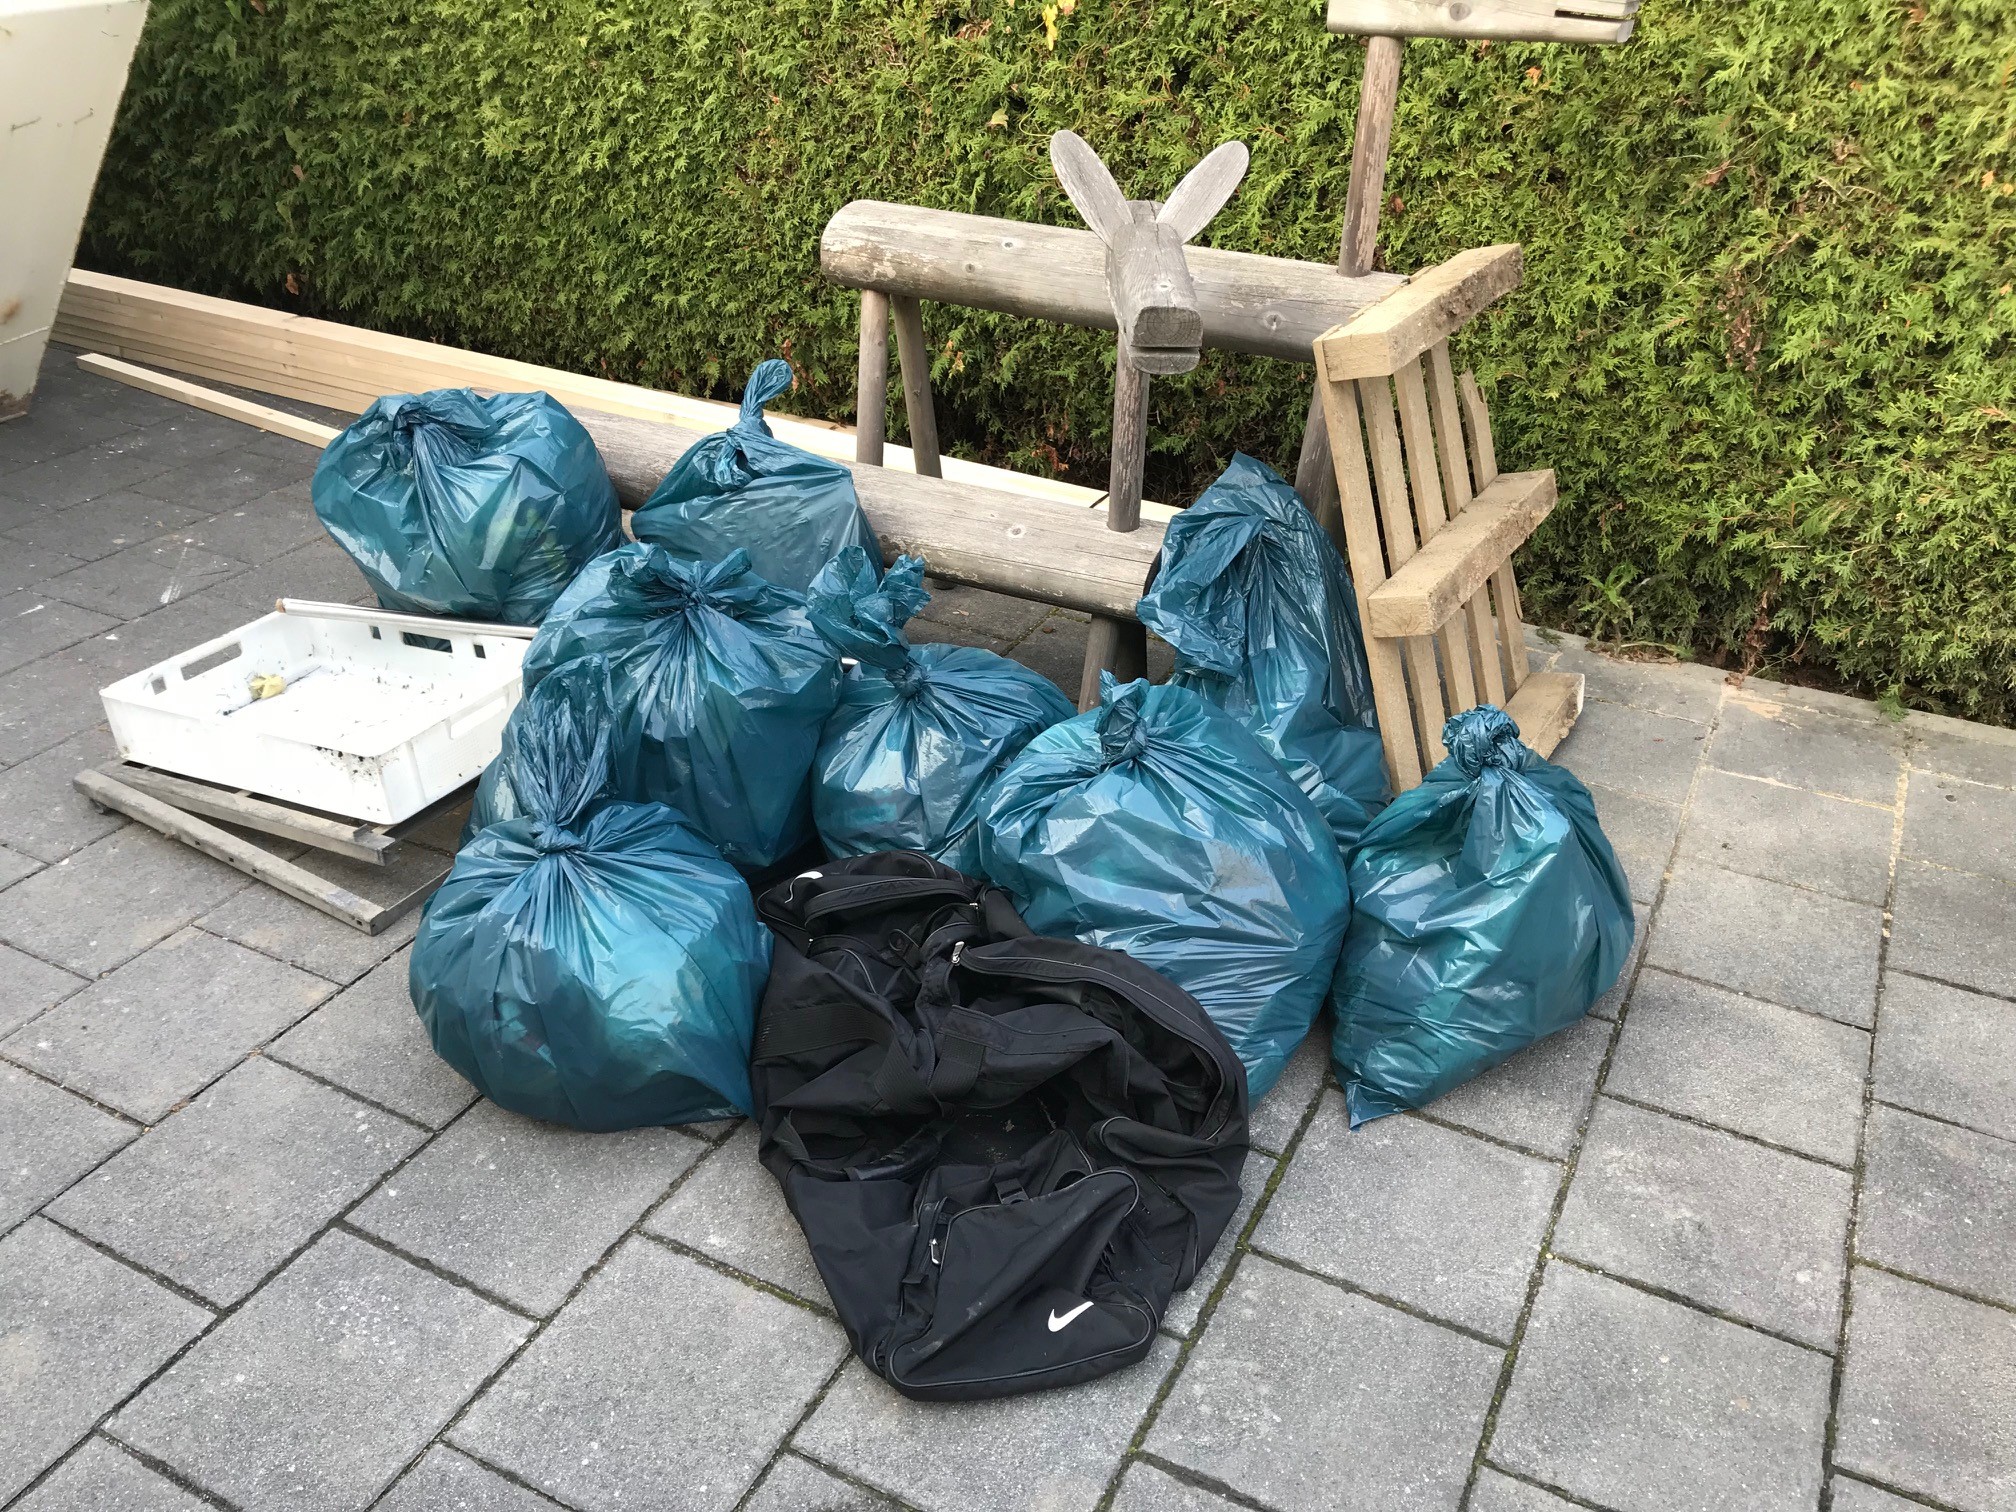 final picture of the collected trash